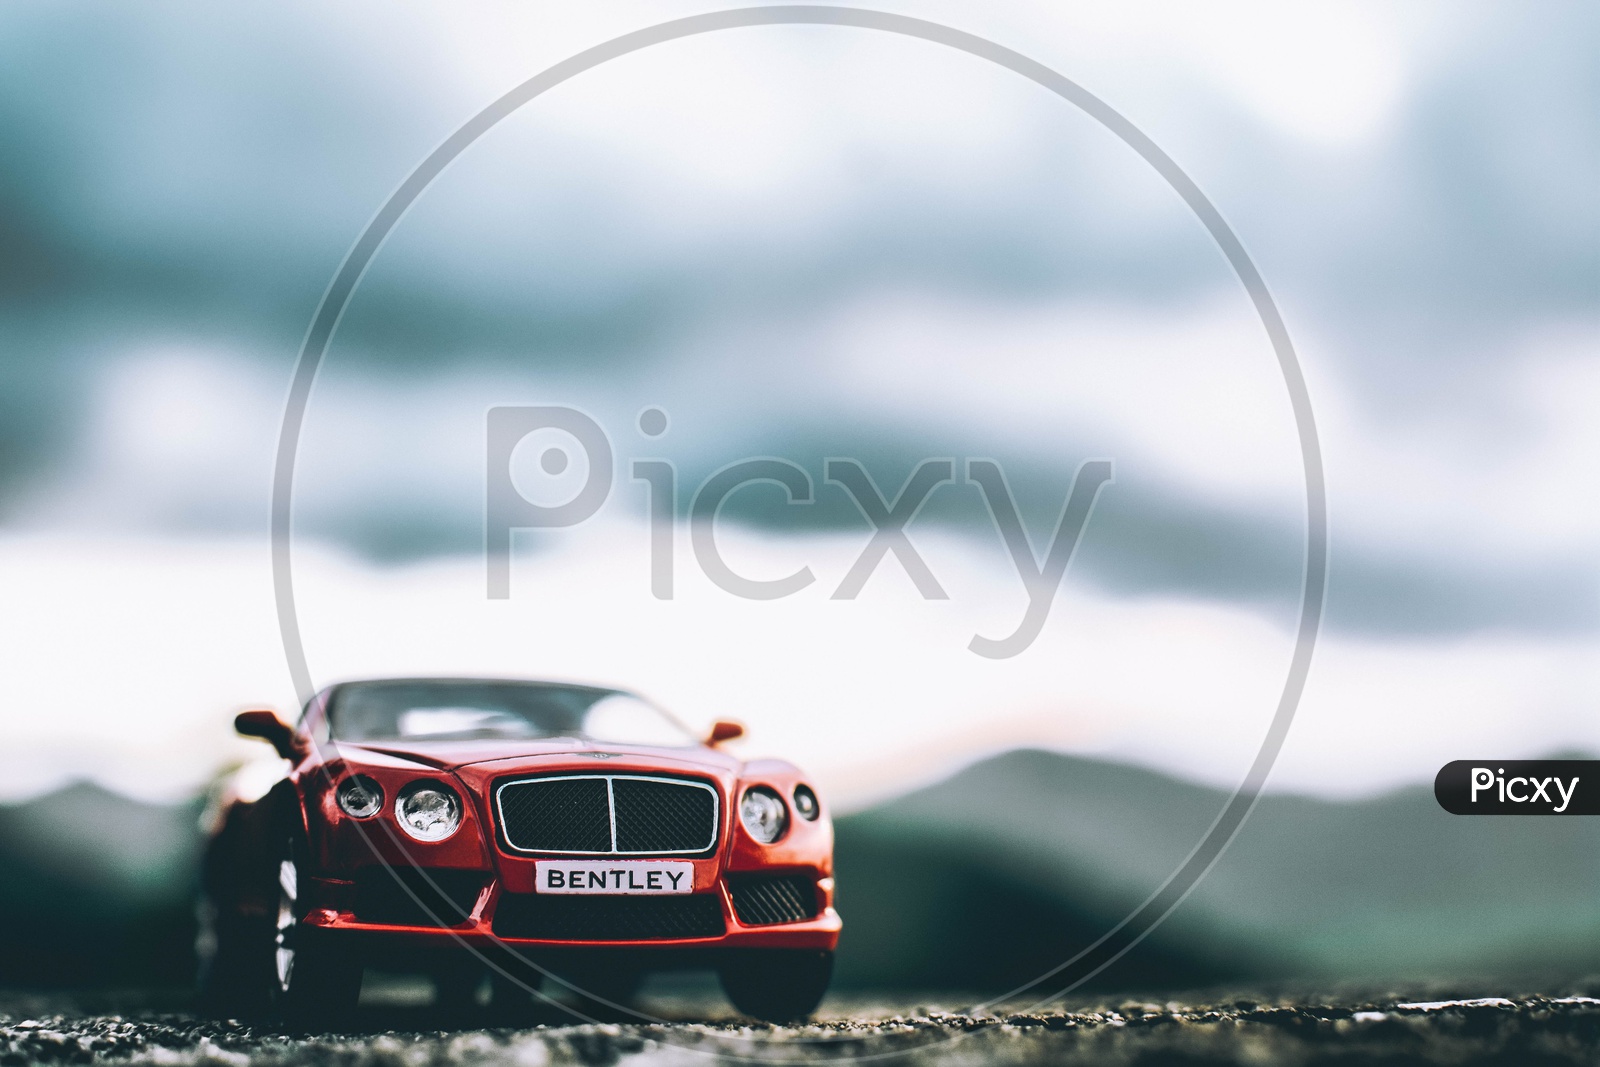 A Composition Shot Of A Bently Car Toy